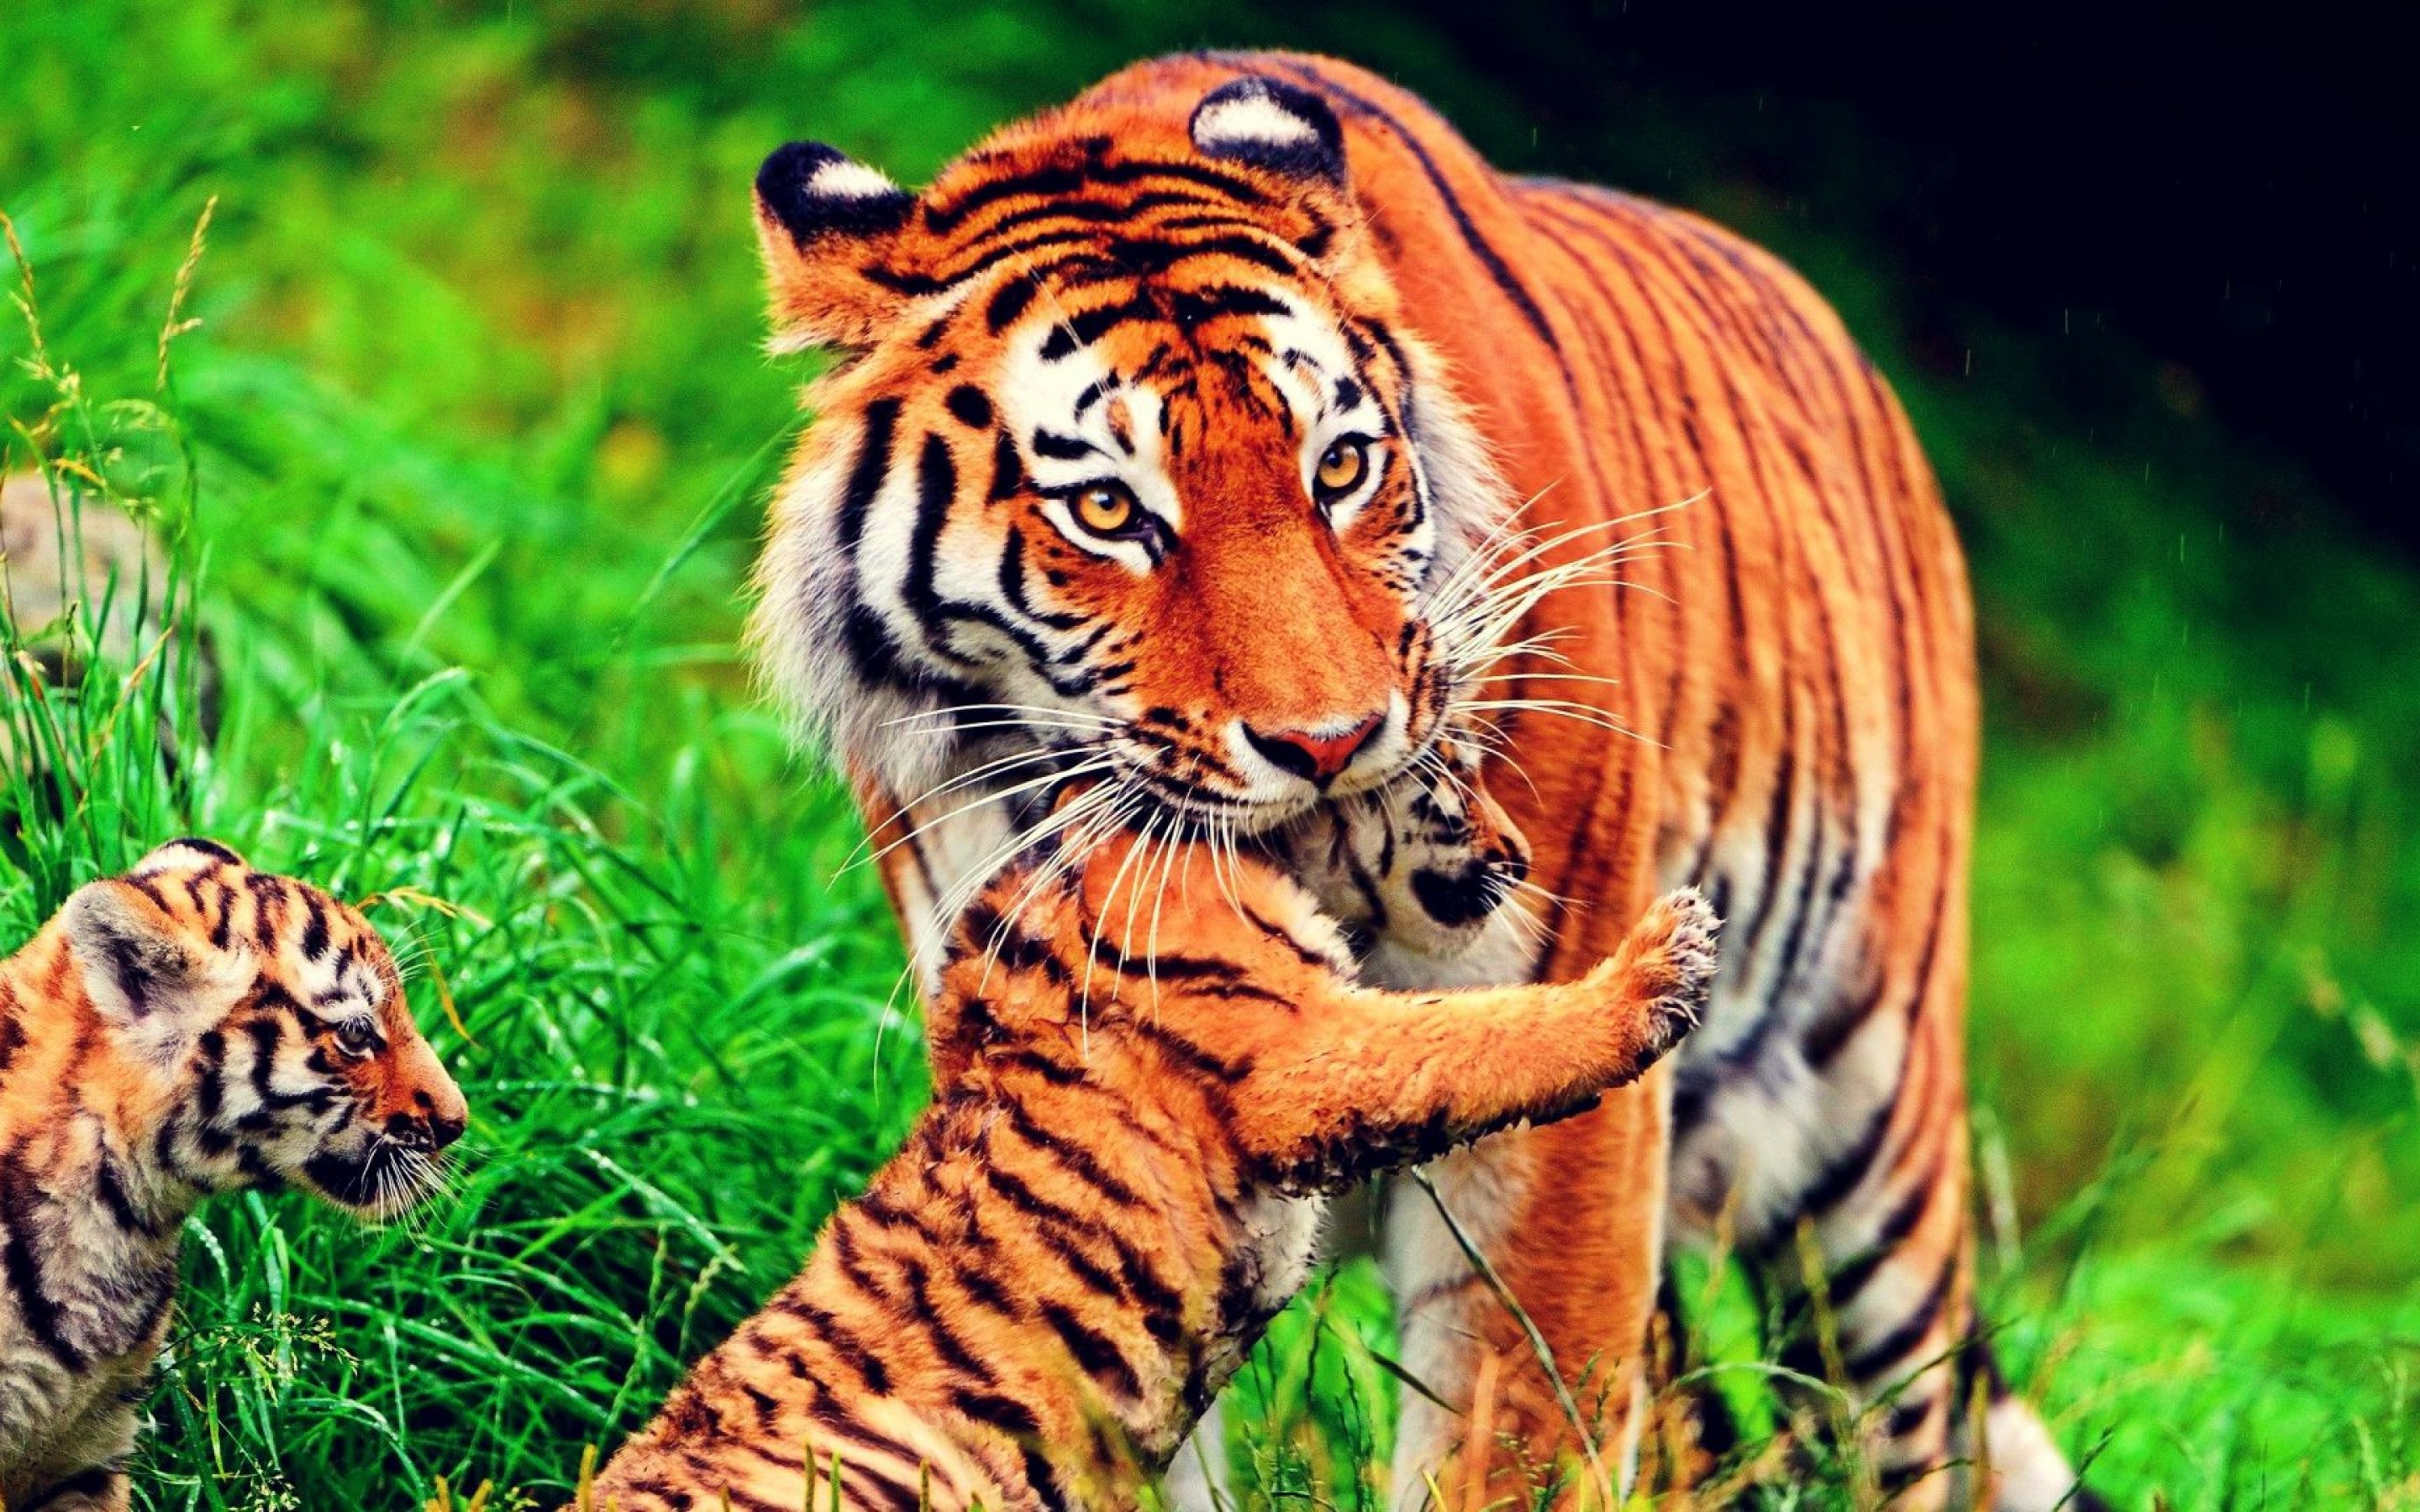 Download wallpaper for 1920x1080 resolution | Hd Tiger | animals ...